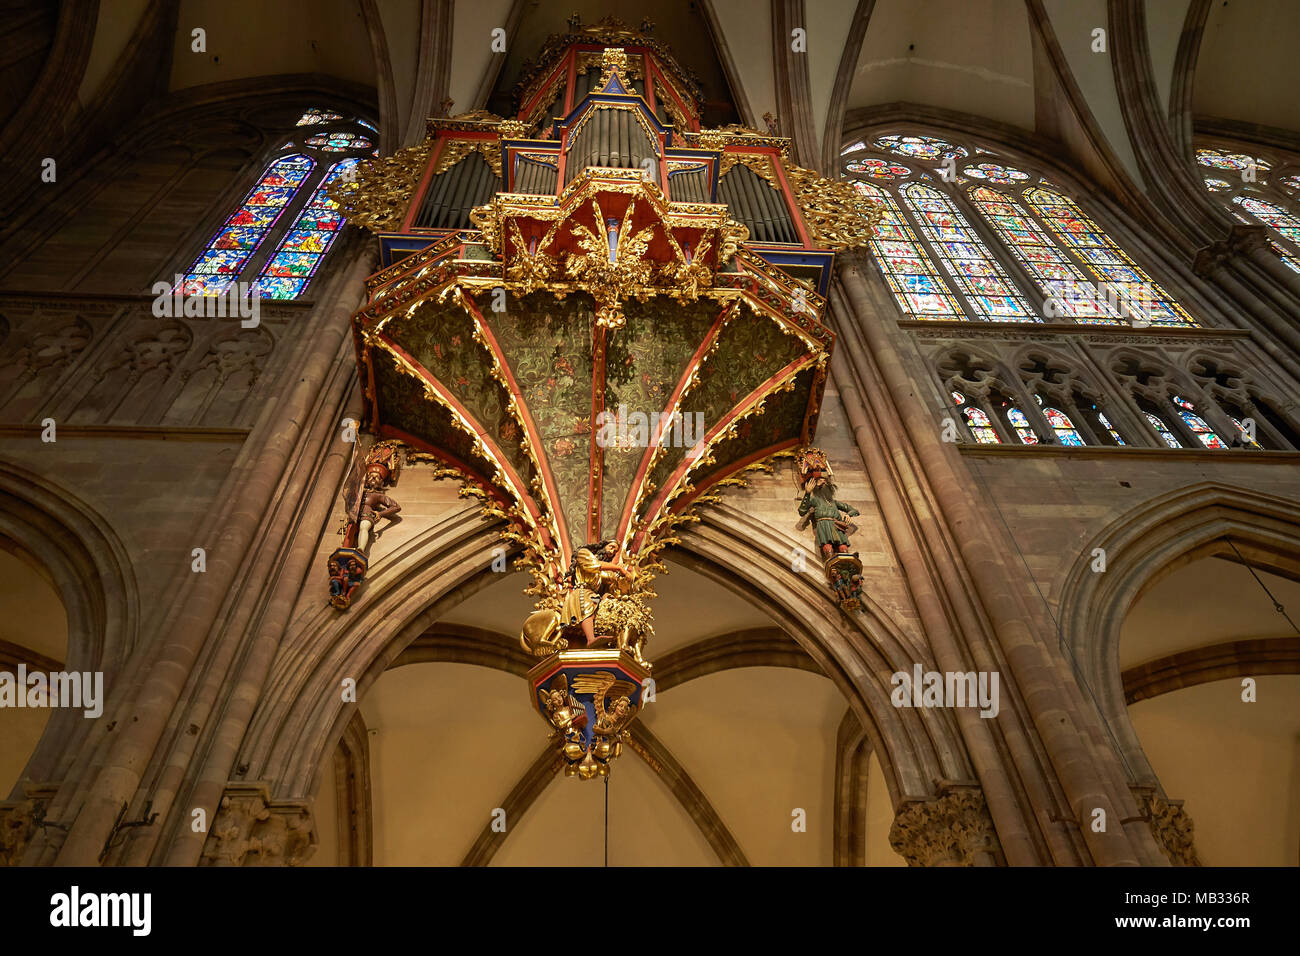 Organ, Gothic swallow nest organ in the nave, Strasbourg Cathedral, Strasbourg, Alsace, France Stock Photo